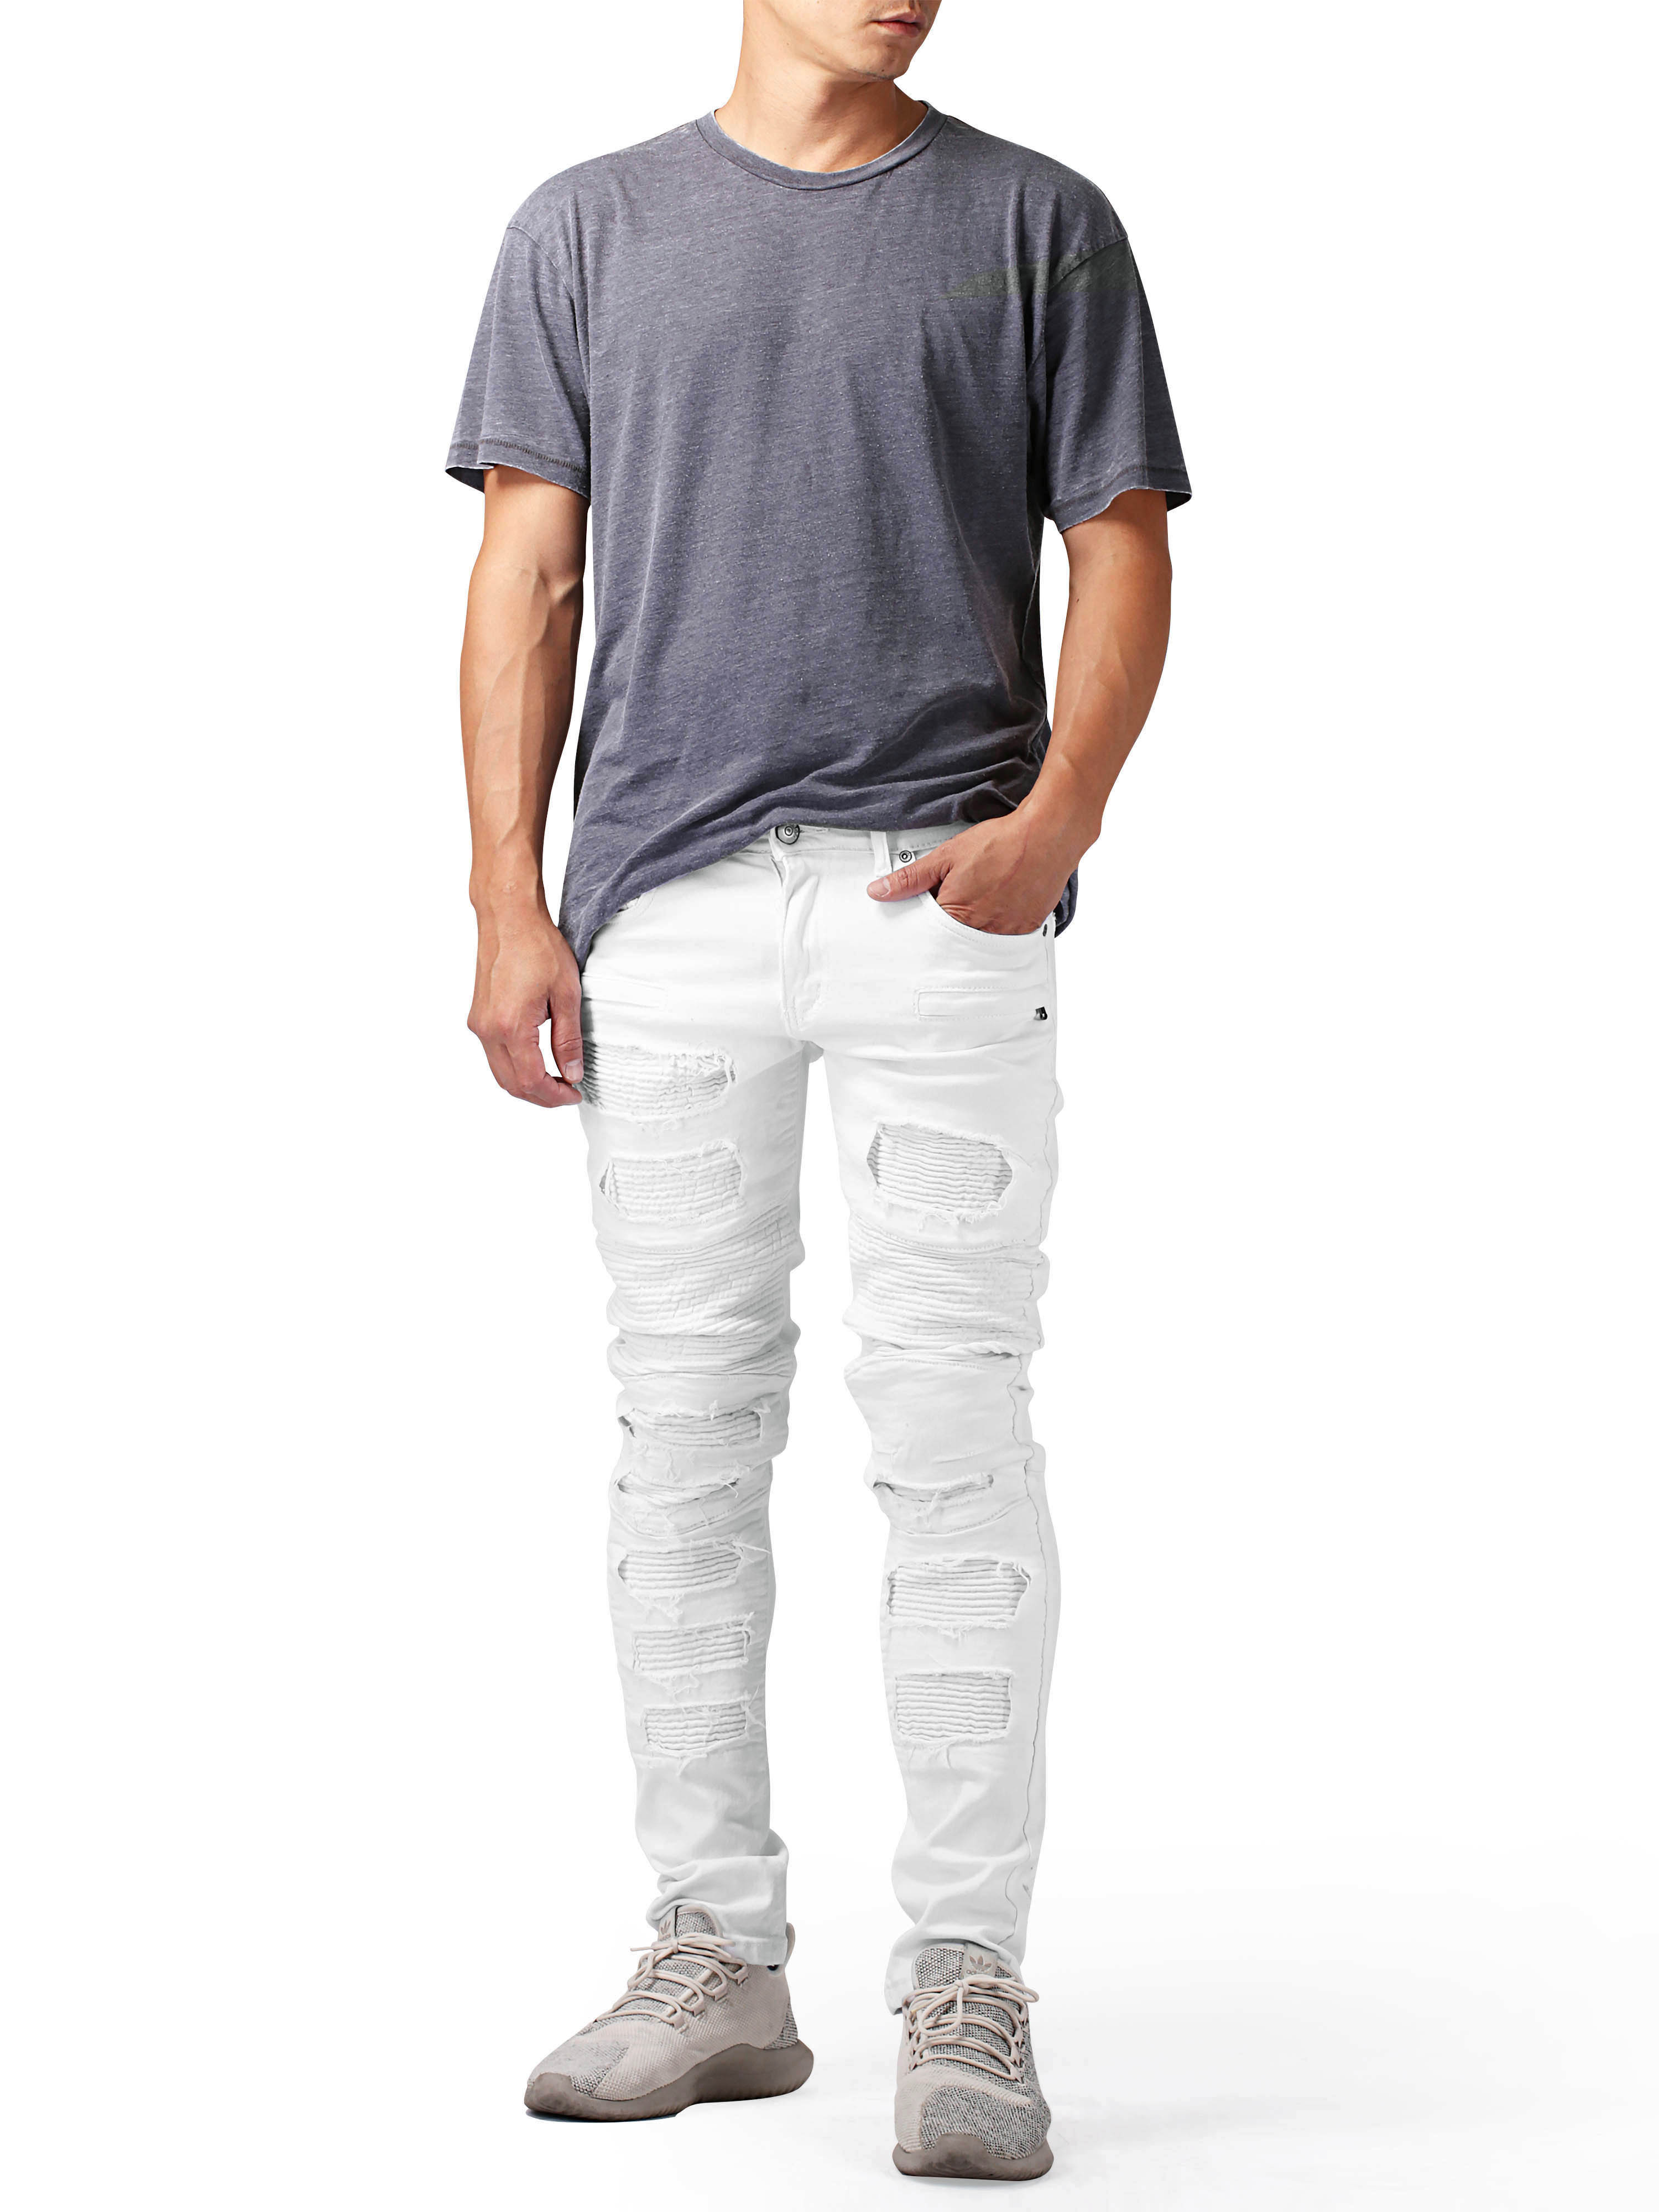 Ma Croix Mens Distressed Skinny Fit Denim Jeans with Zipper Pocket - image 2 of 6